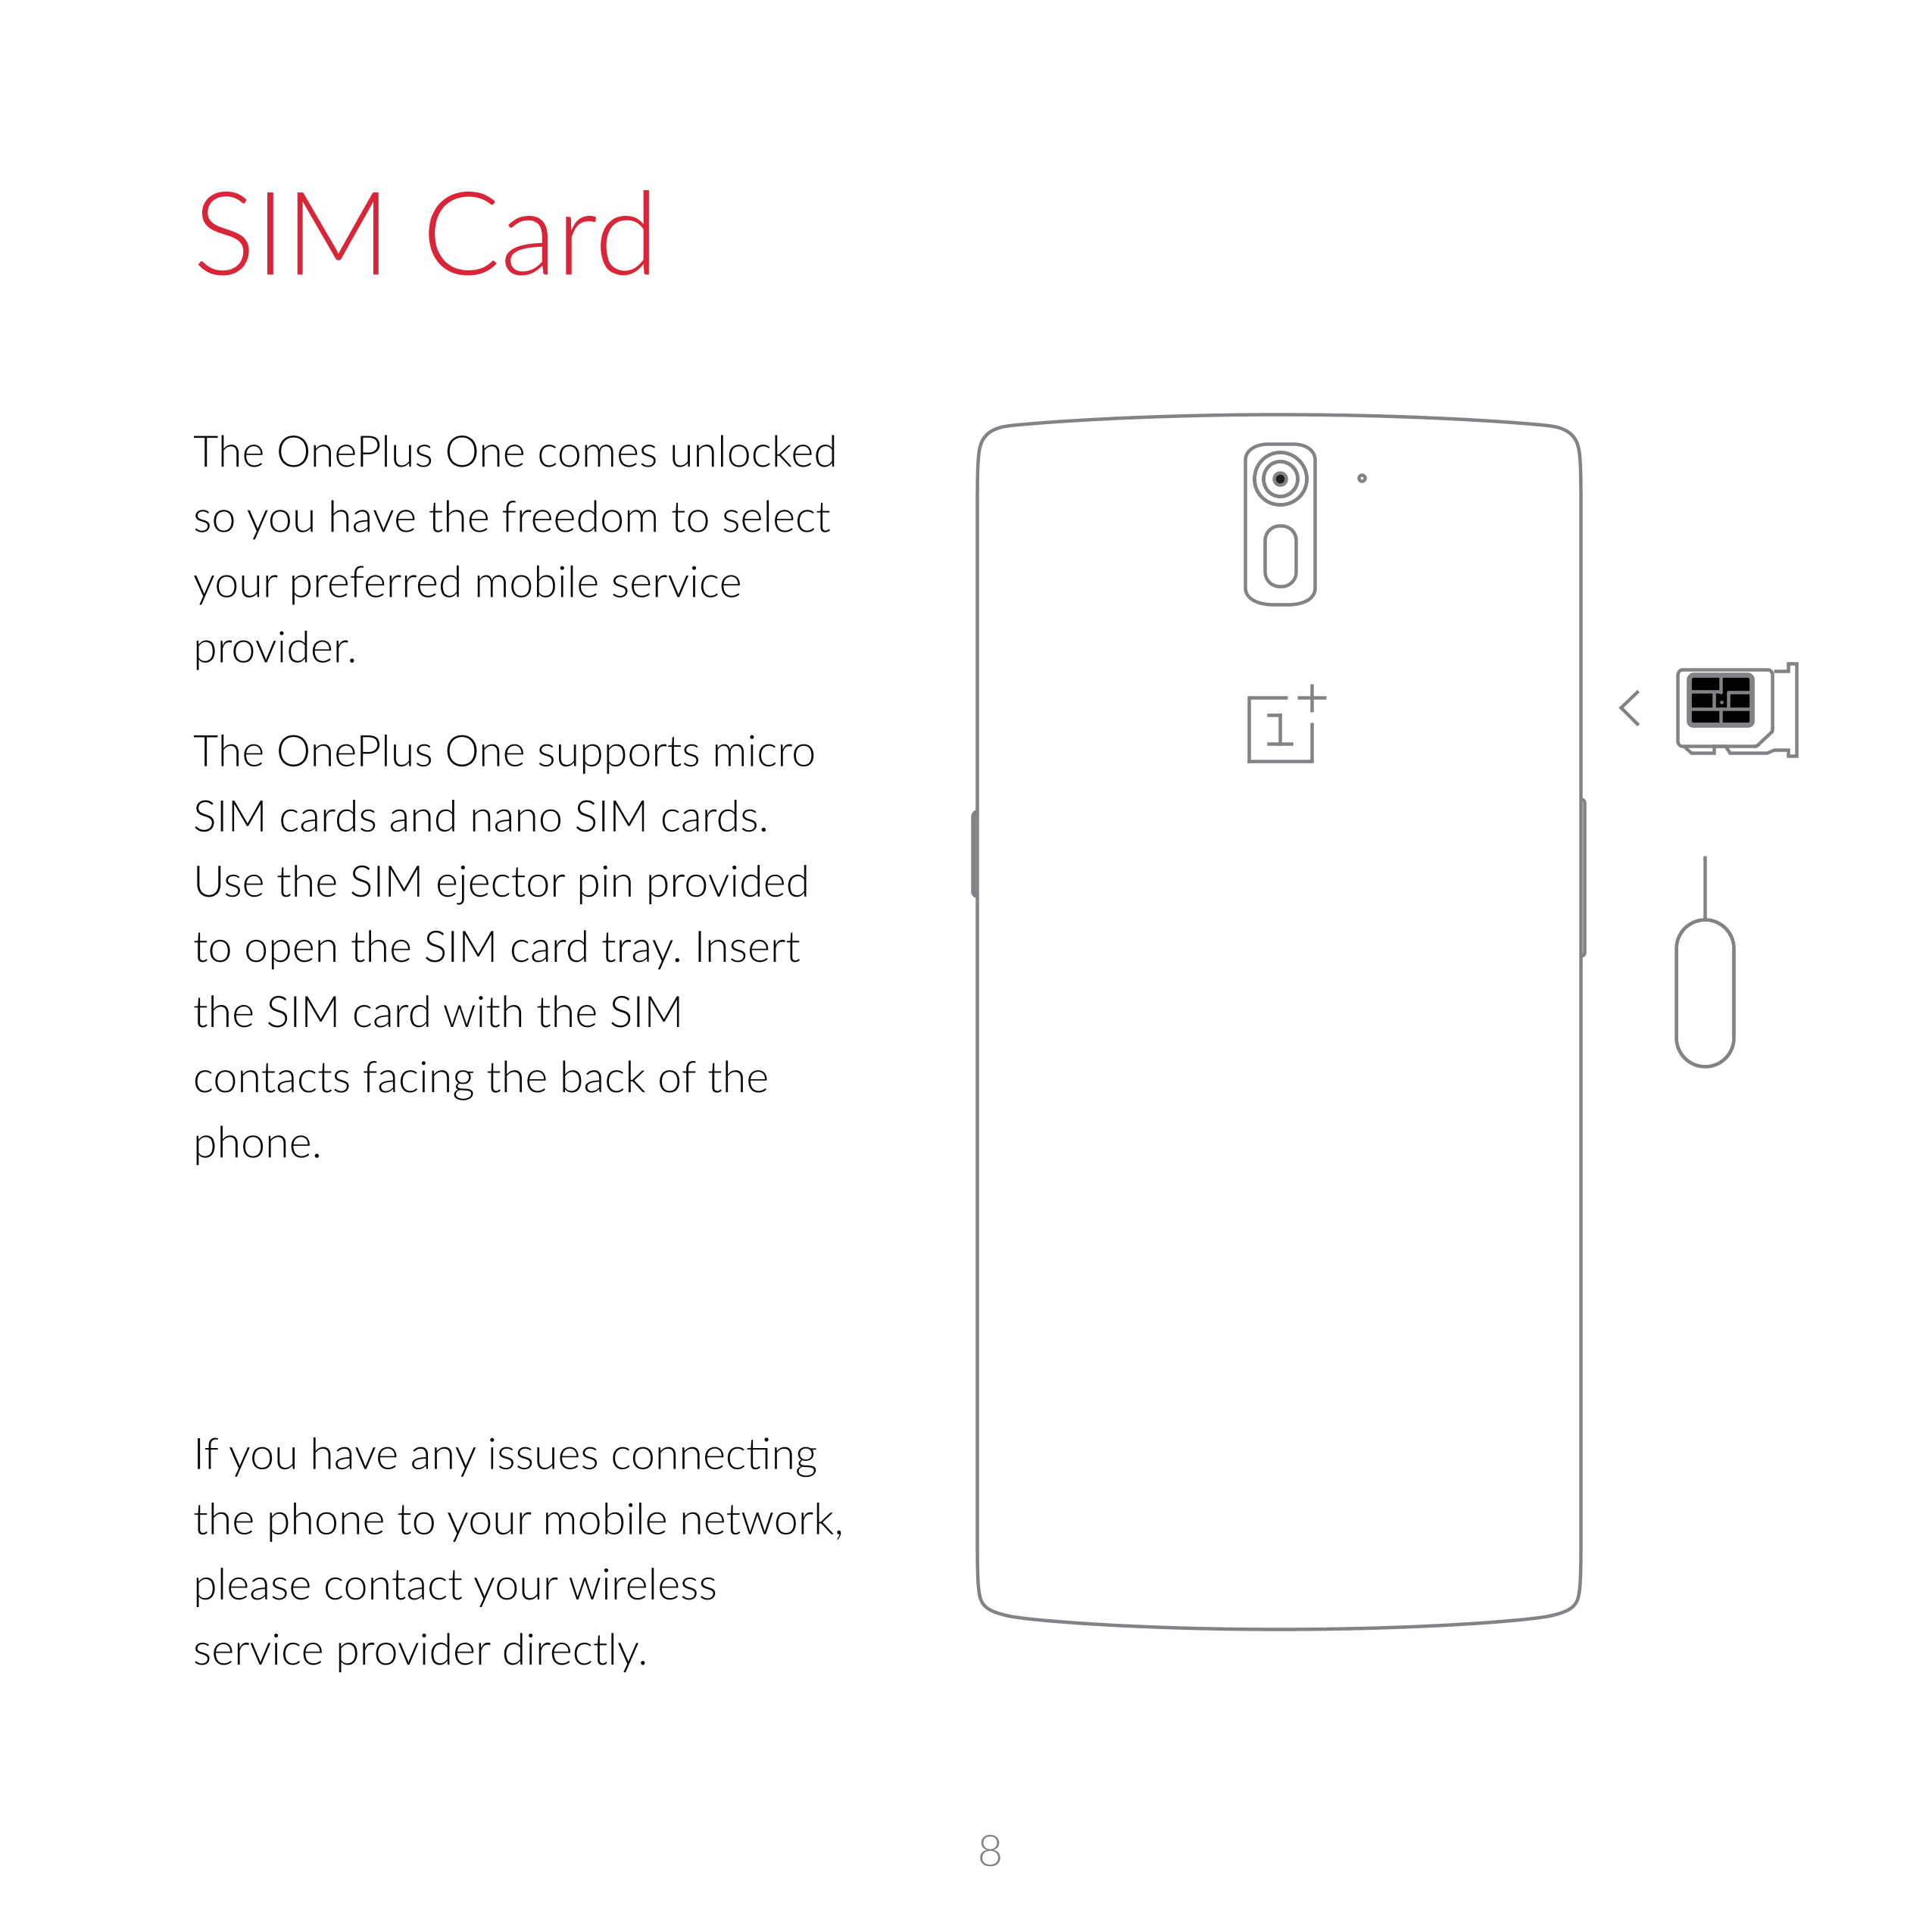 SIM Card
The  OnePlus  One  comes unlocked 
so  you have the freedom to select 
your preferred mobile service 
provider.  
The  